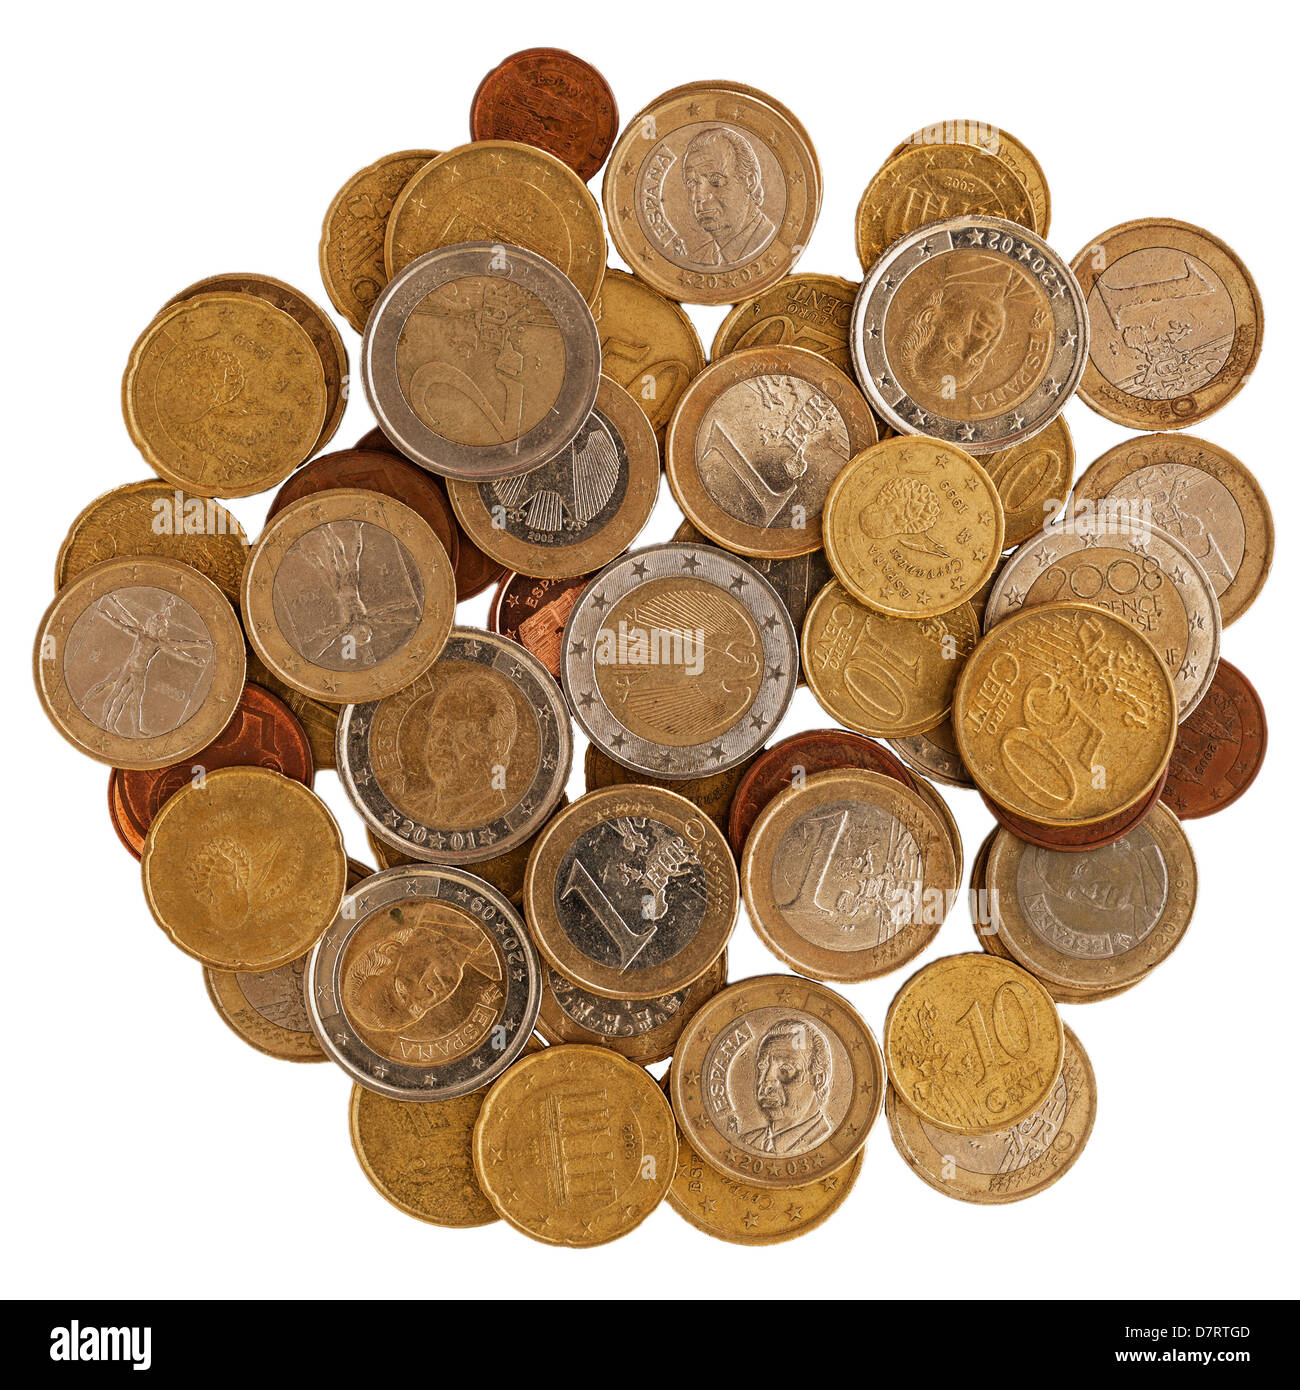 Mixed Spanish coins including euros and cents on a white background Stock Photo